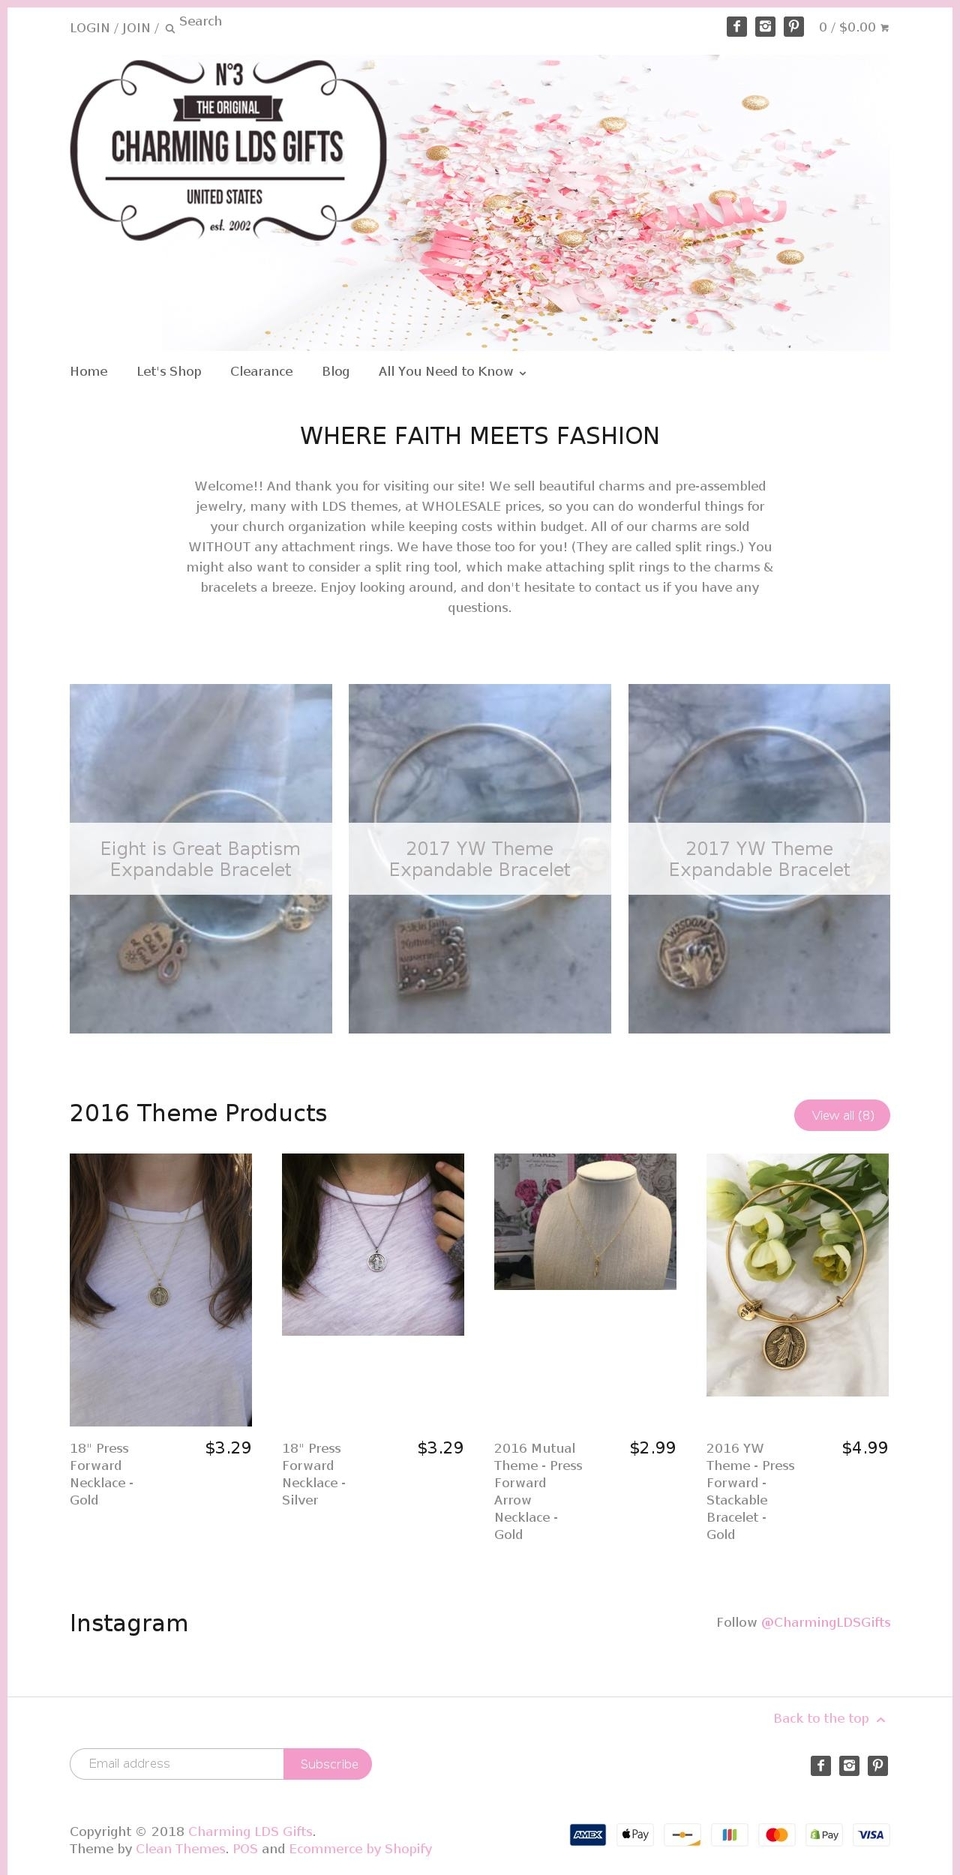 Charming LDS Gifts Shopify theme site example breezykdesigns.org